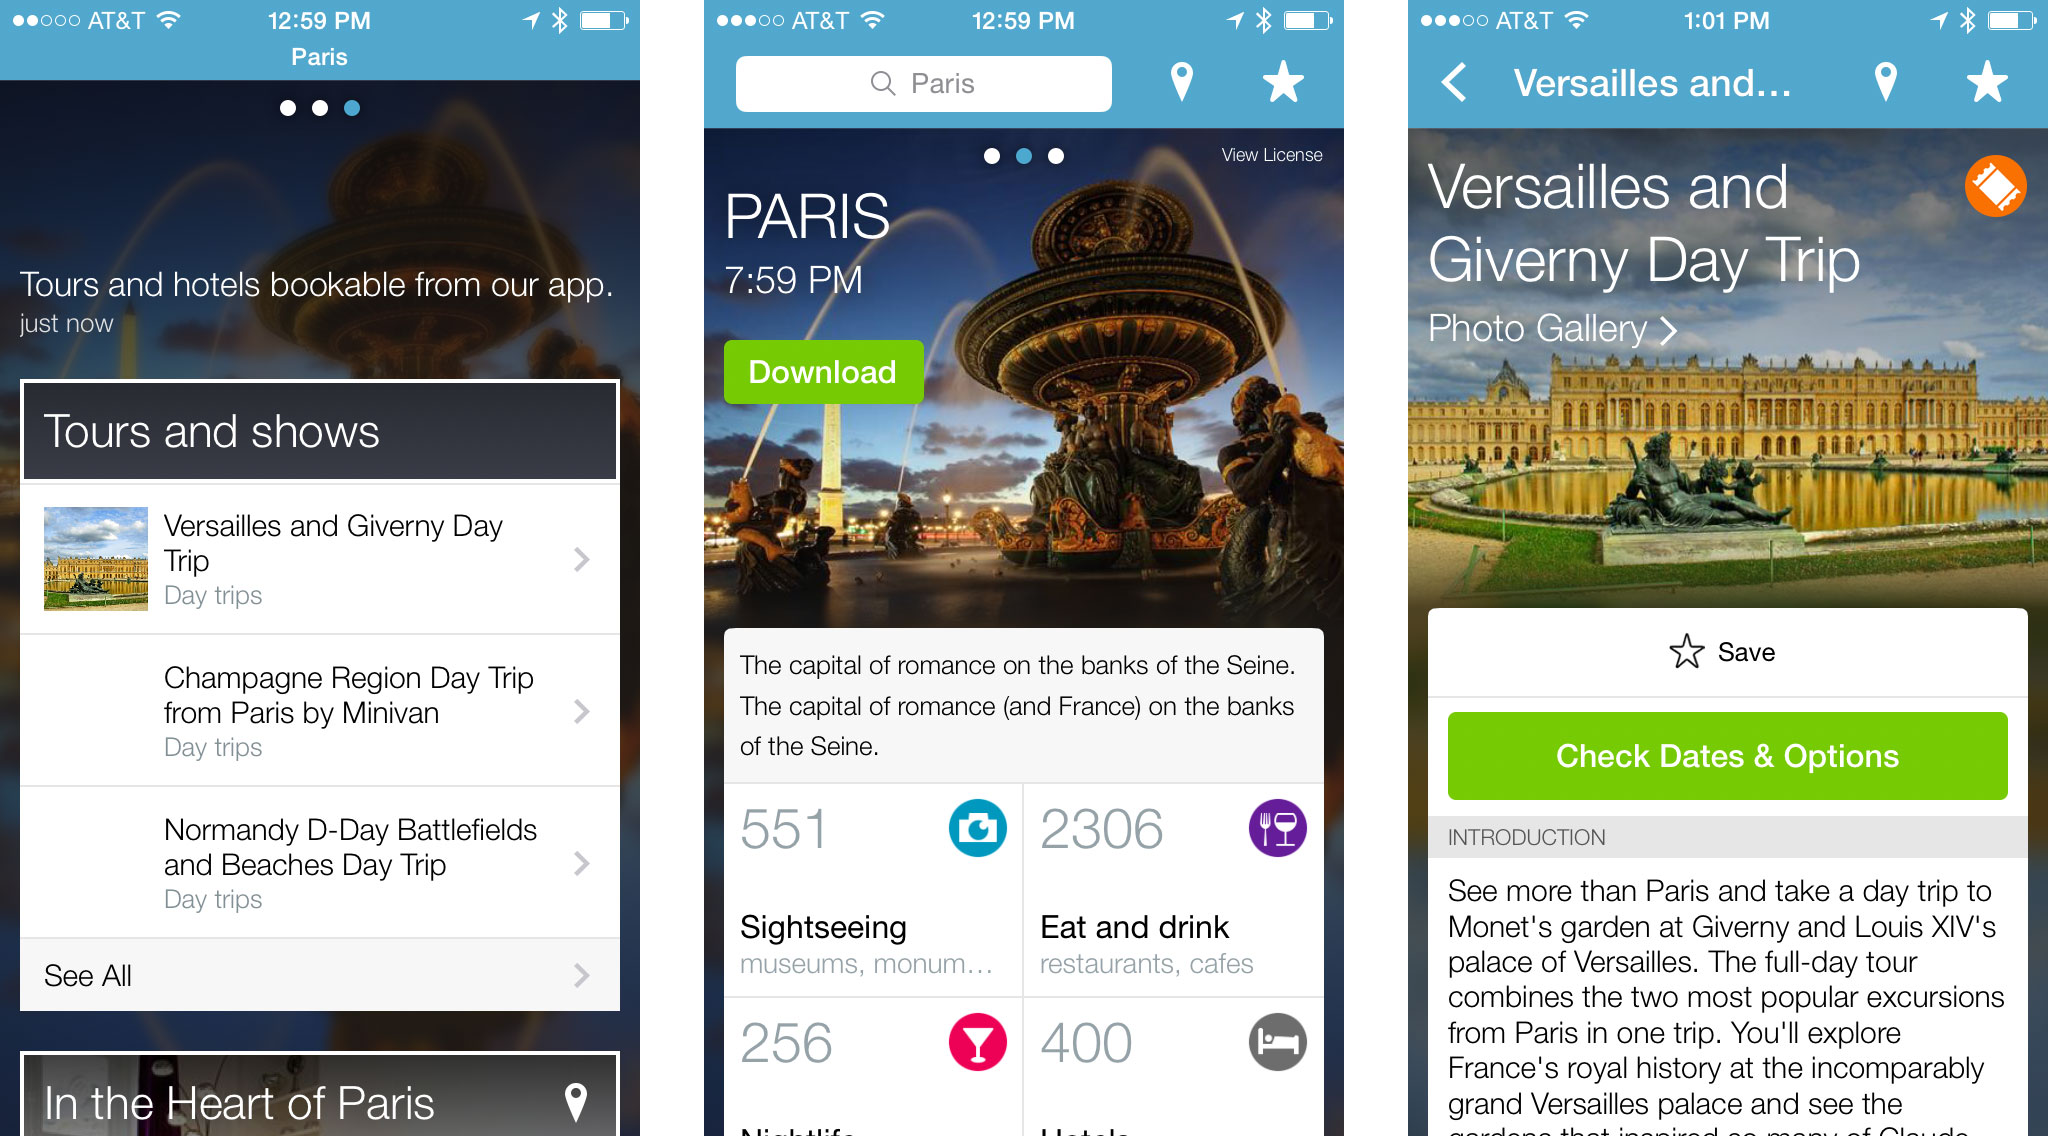 Best travel guide apps for iPhone: Triposo